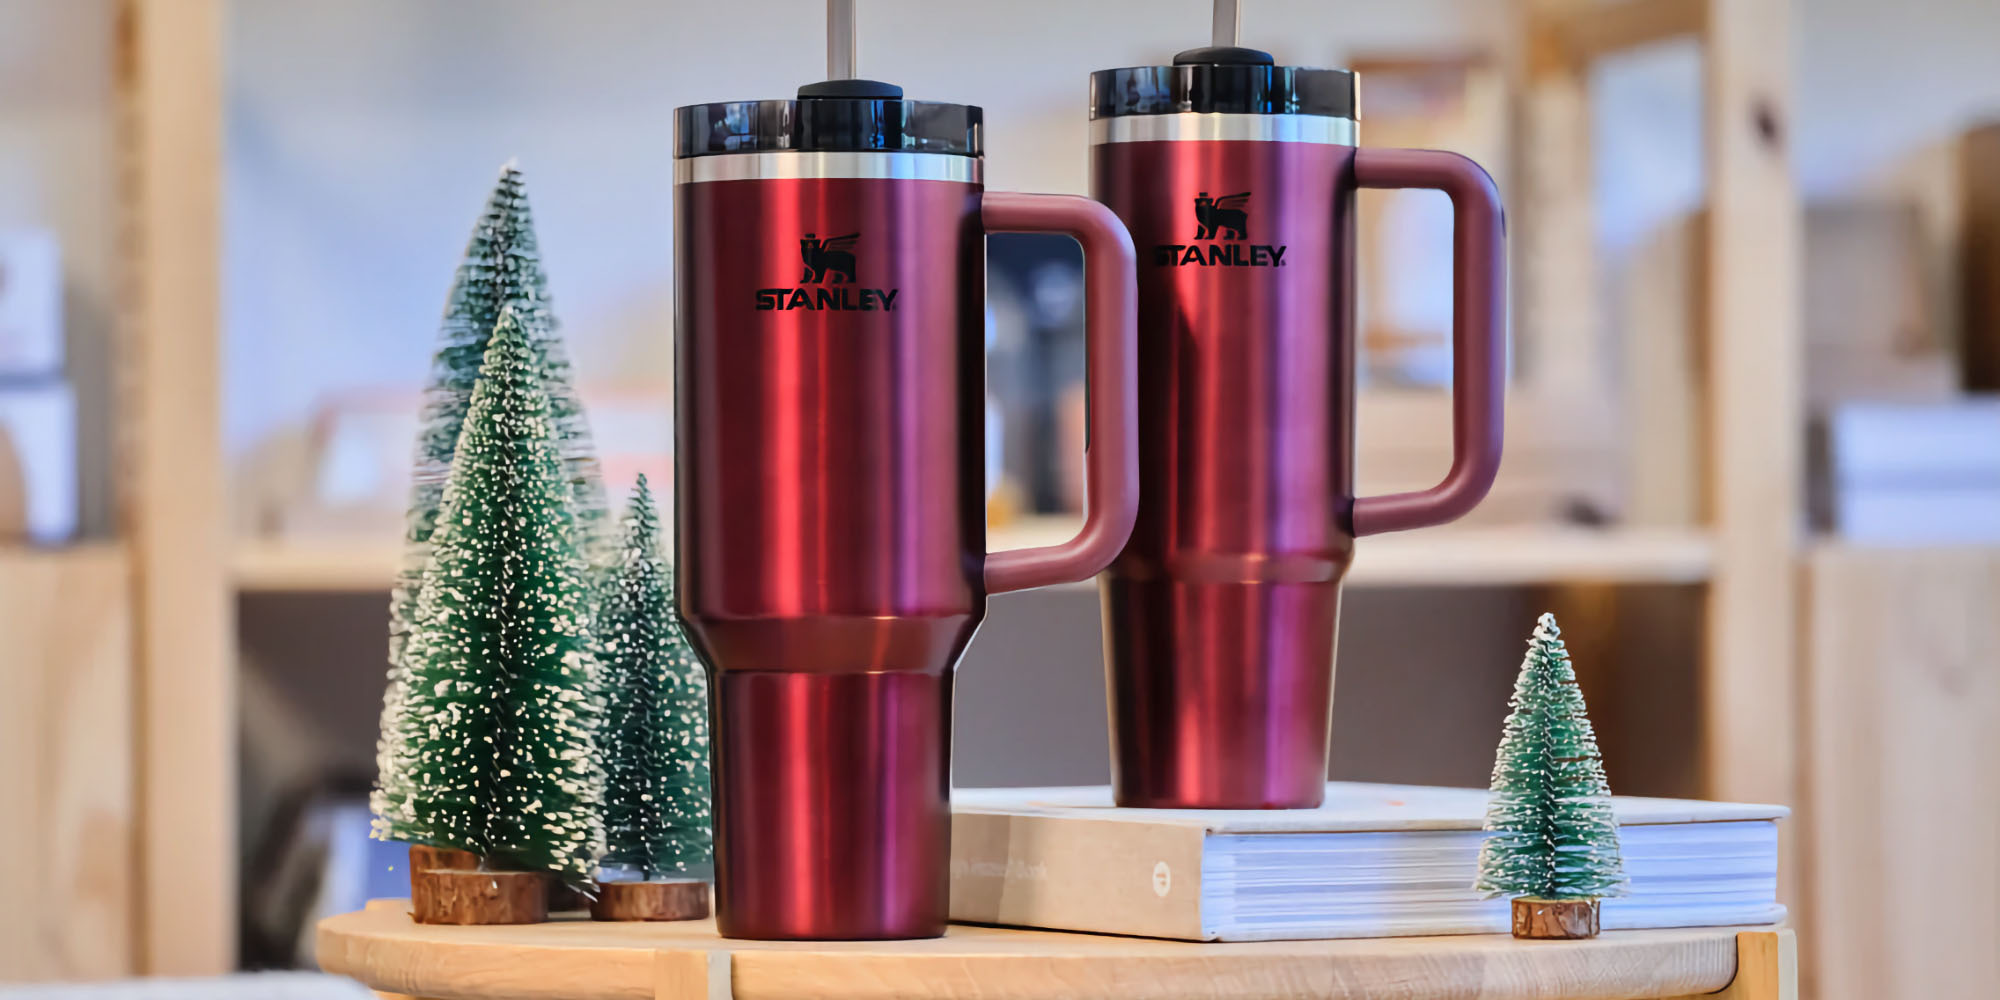 Stanley's early Black Friday sale takes 25 off mugs, cups, and steins